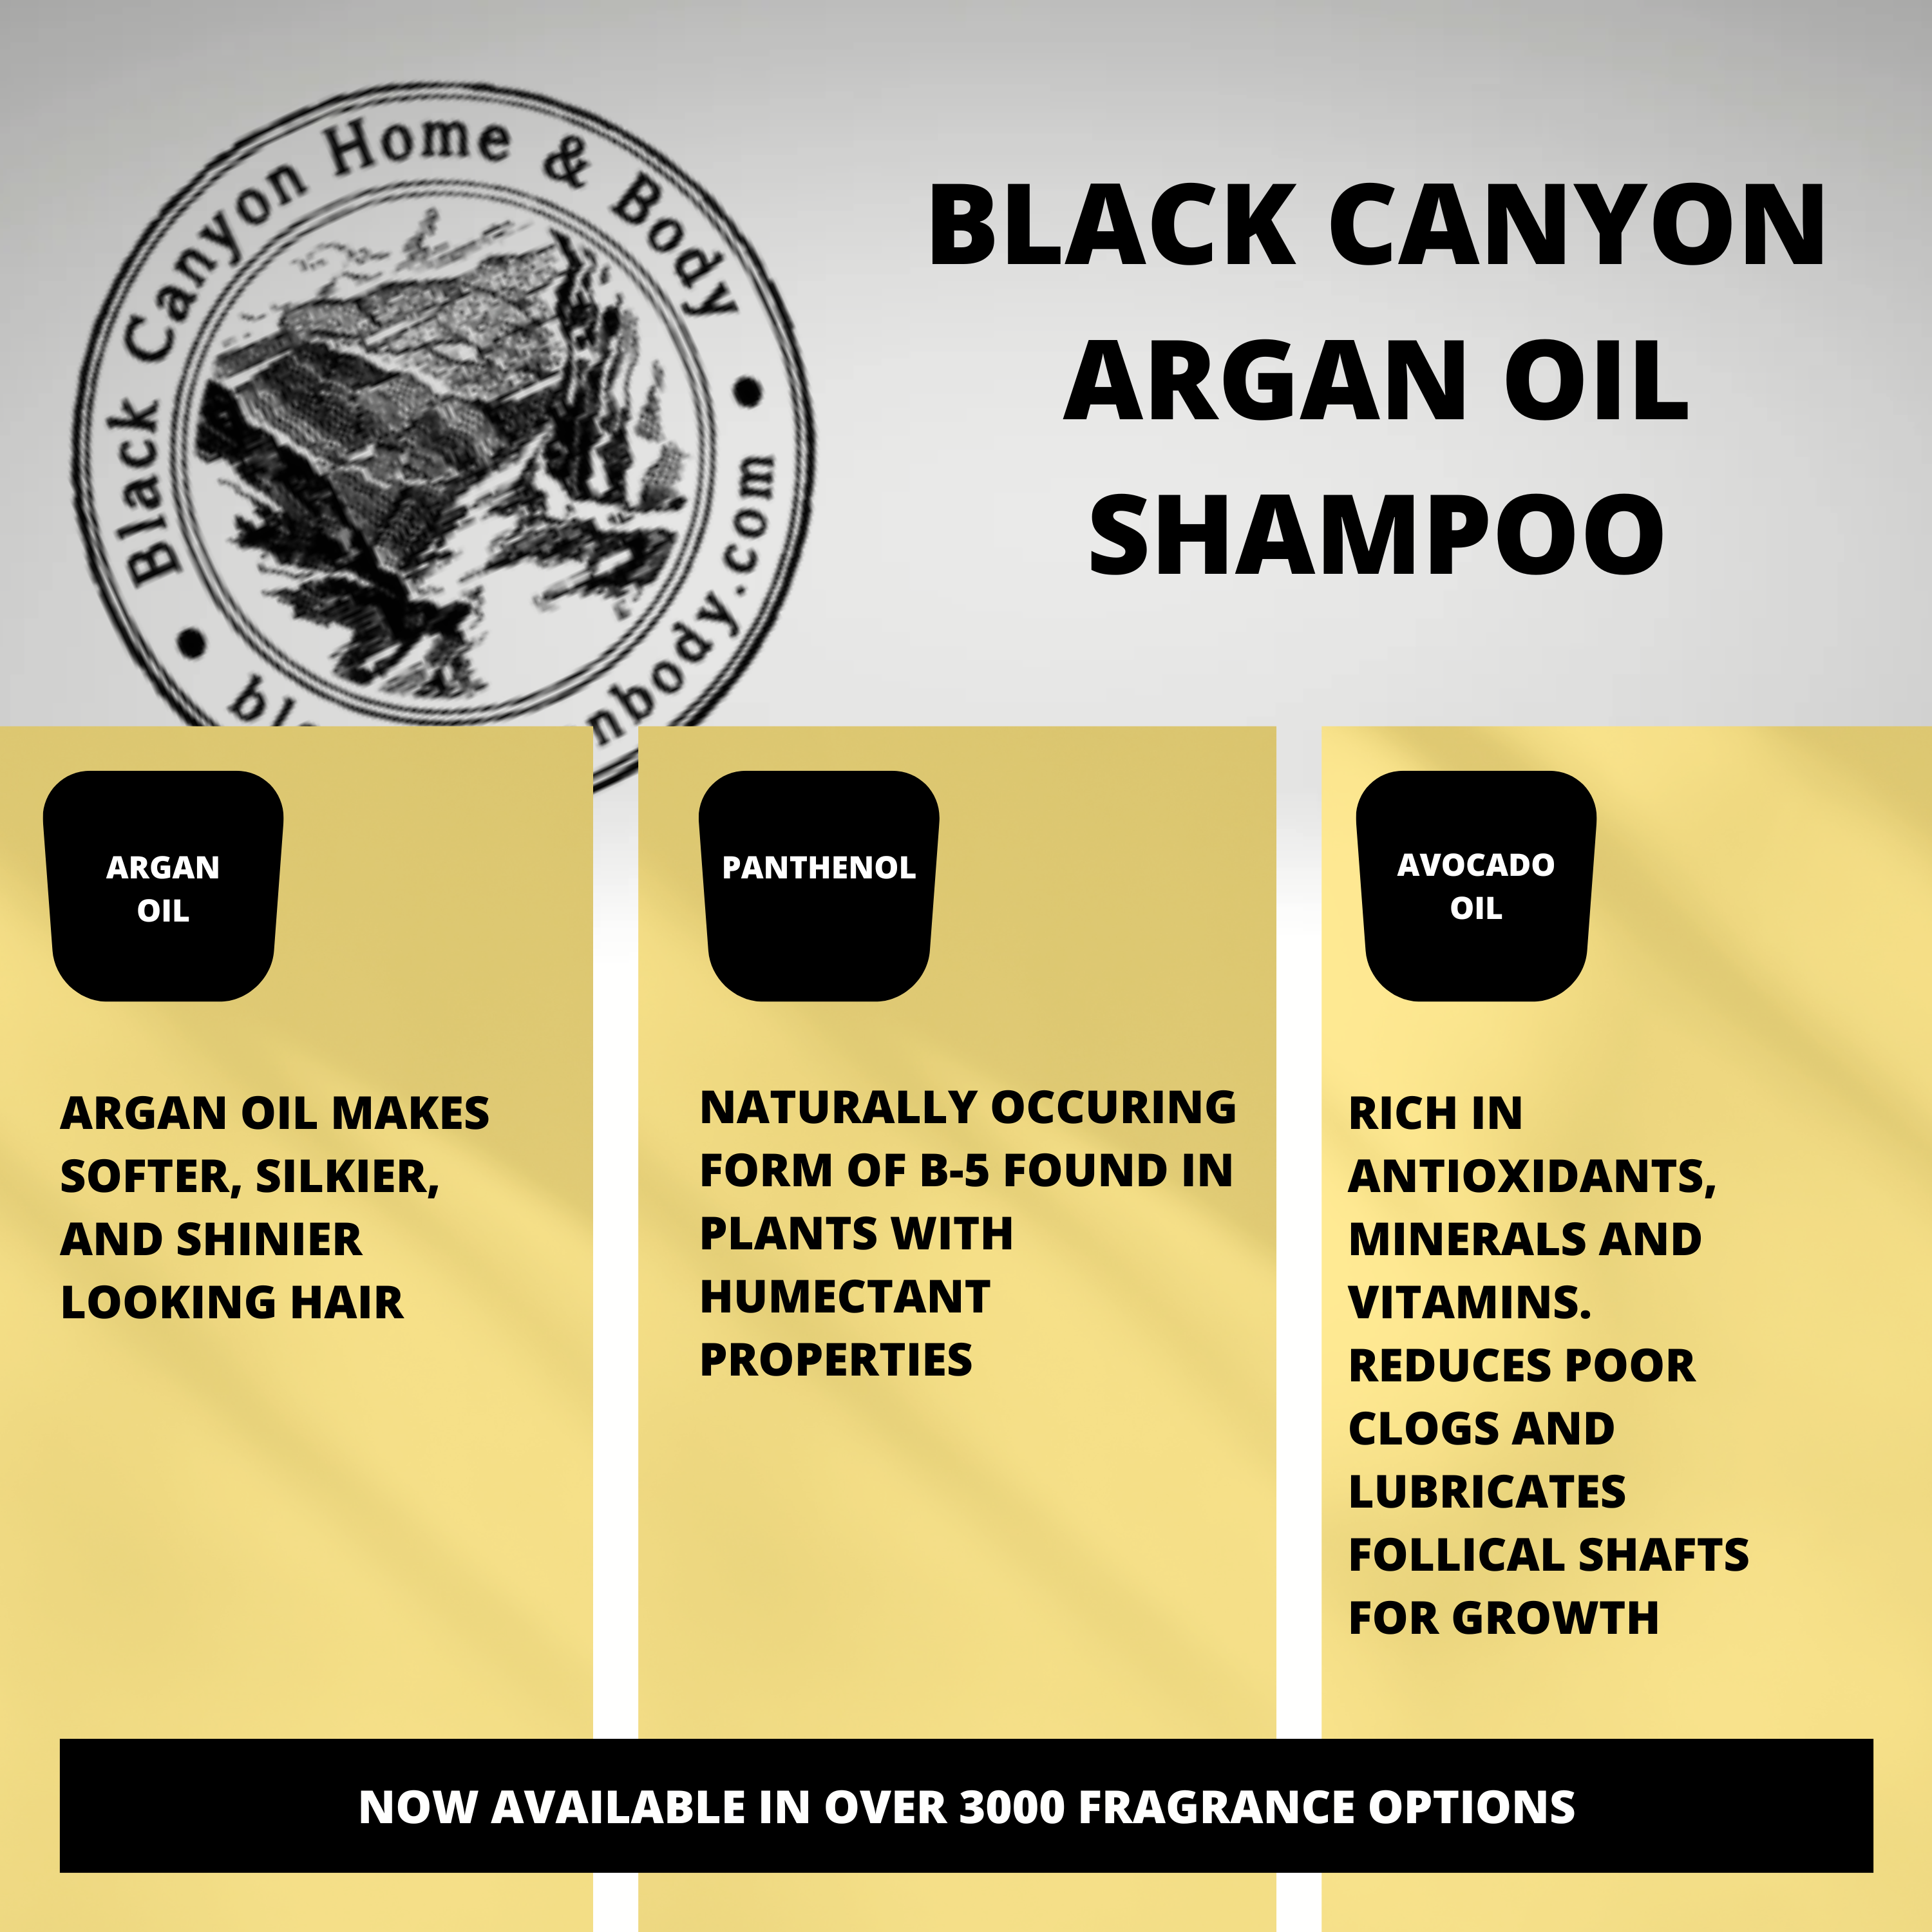 Black Canyon Chocolate Covered Cherries Scented Shampoo with Argan Oil